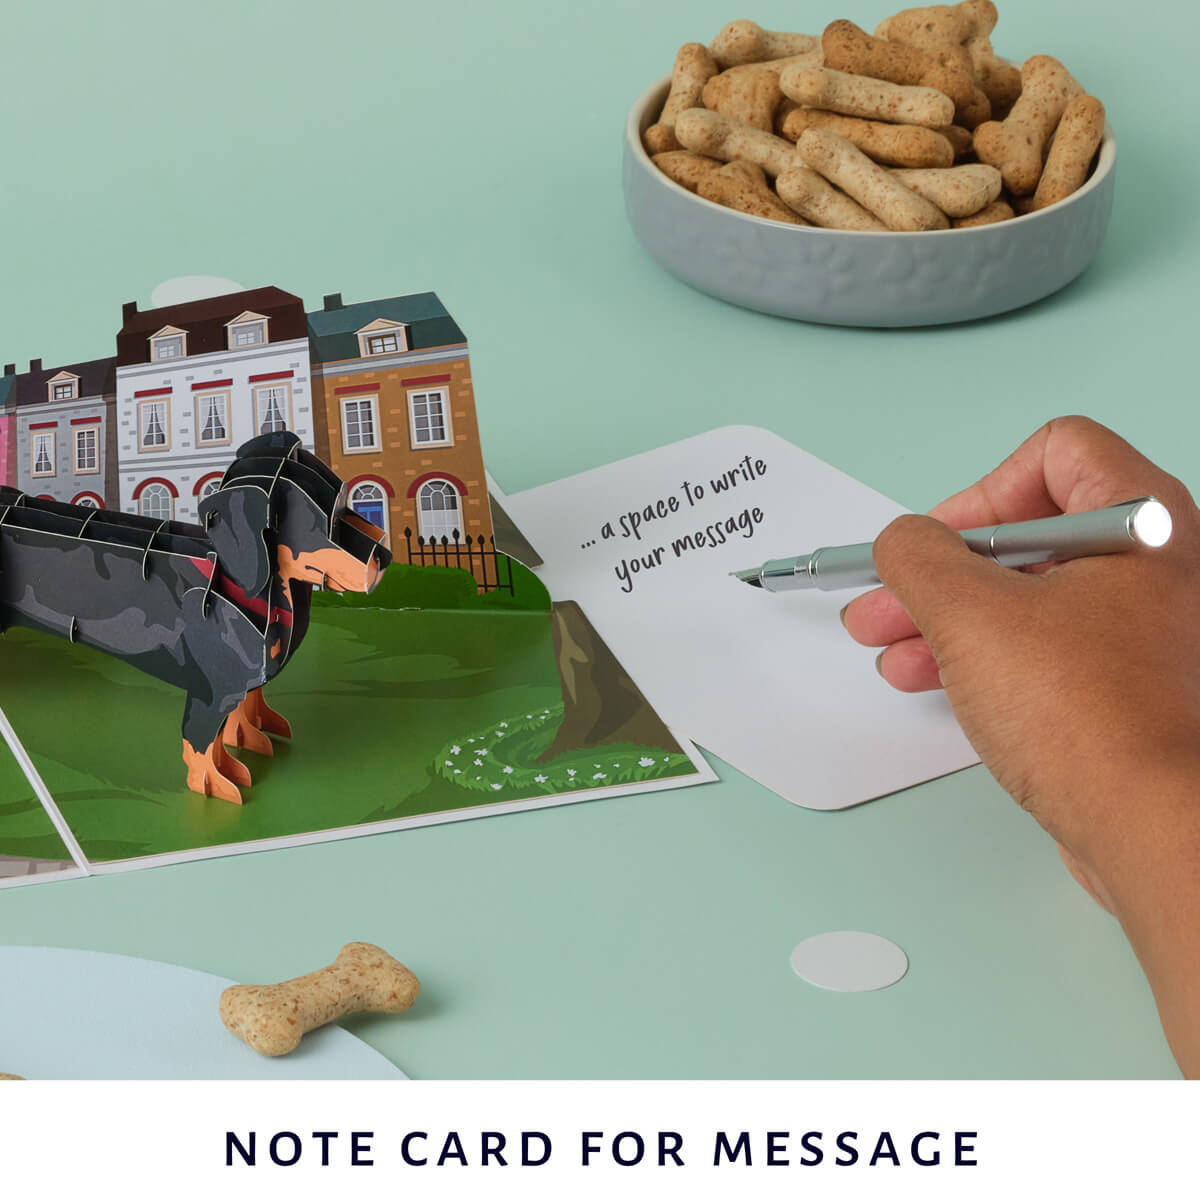 dachshund pop up card by cardology - image showing slide out notecard which gives a space to write message on